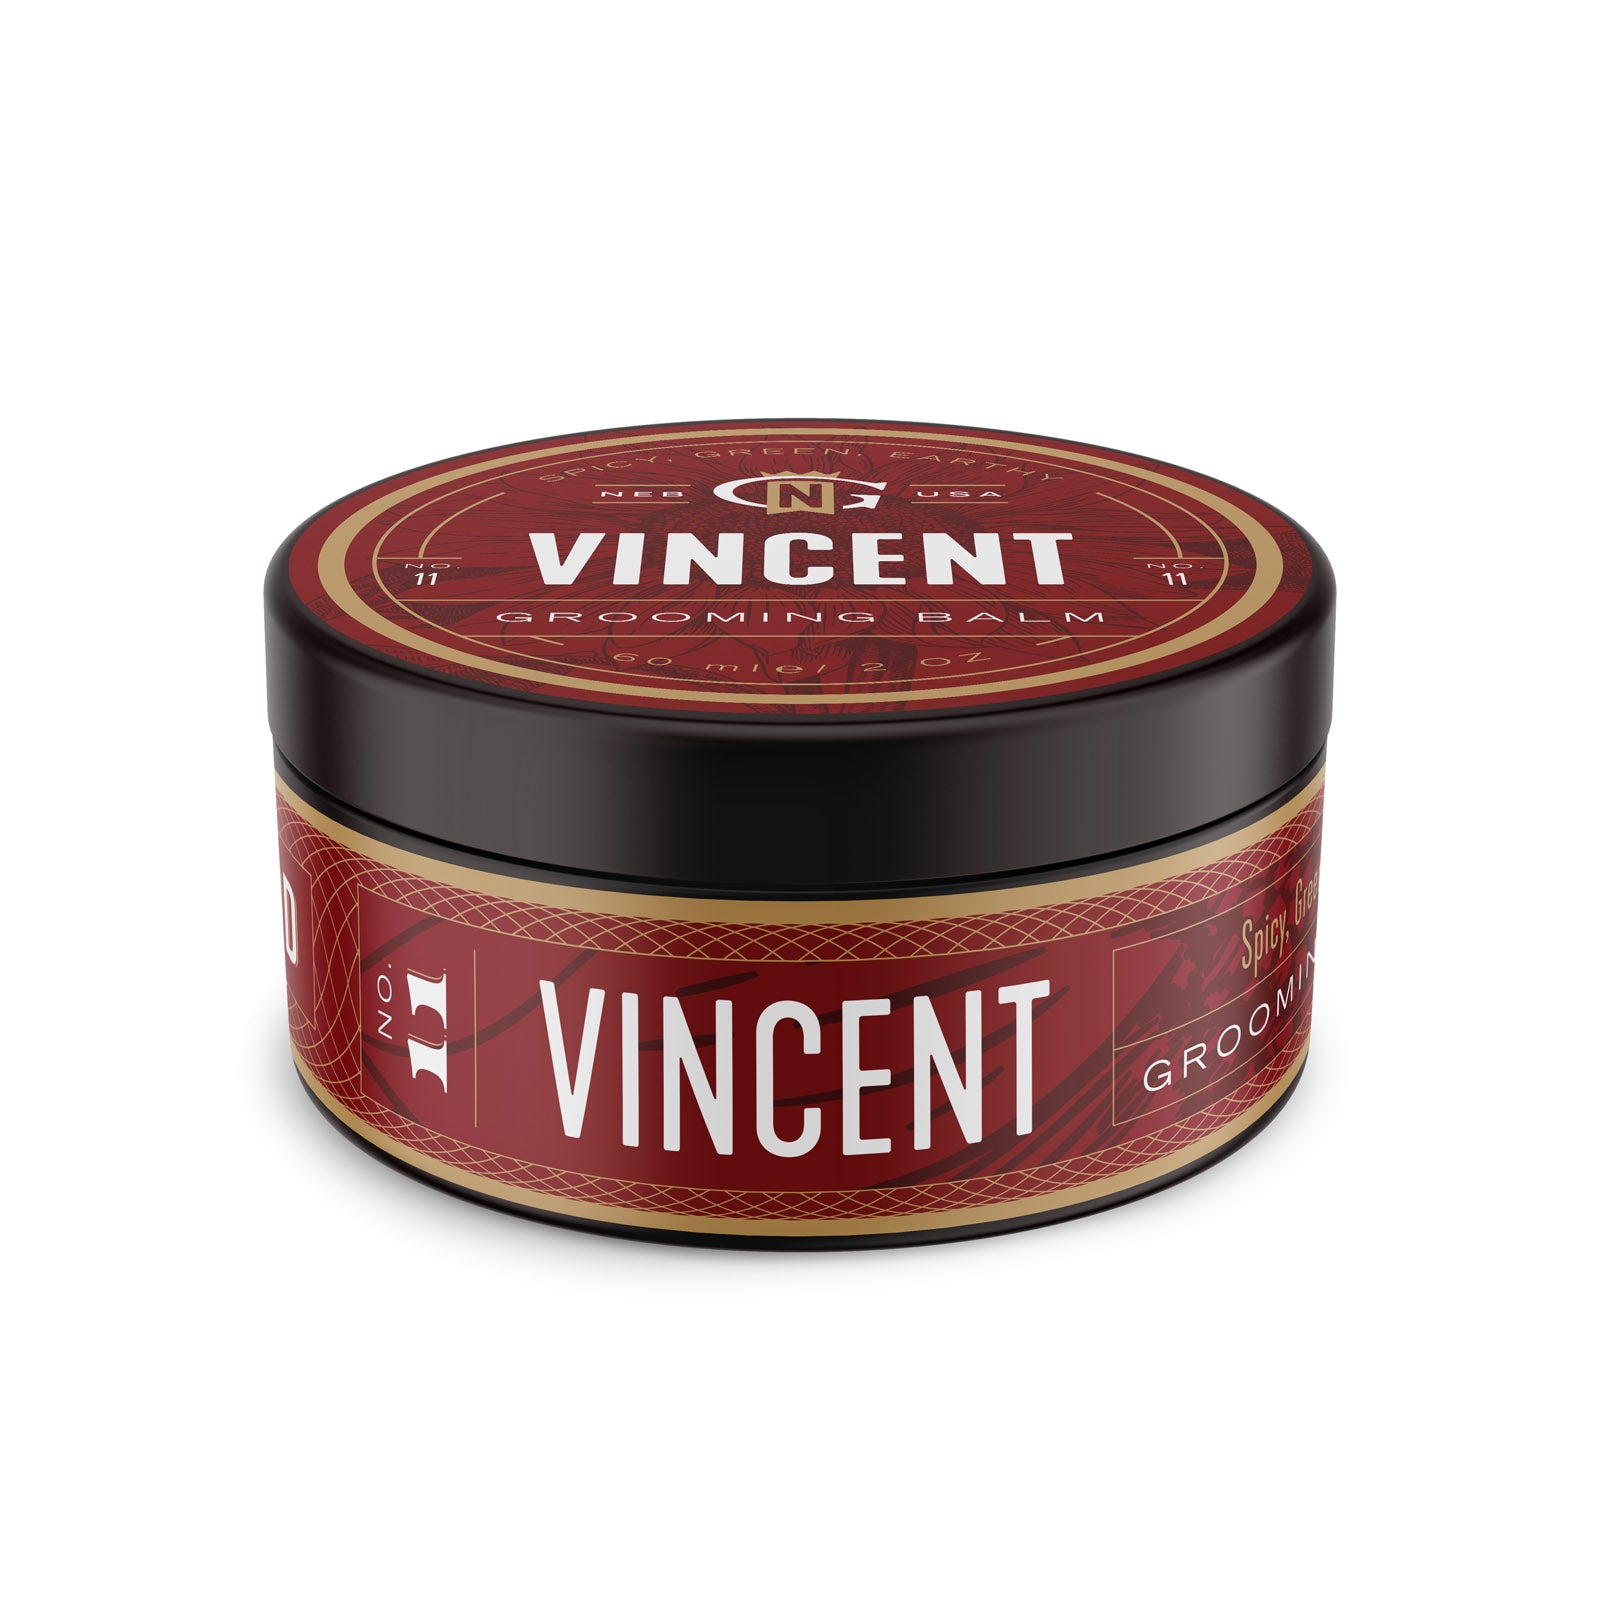 Vincent Grooming Balm